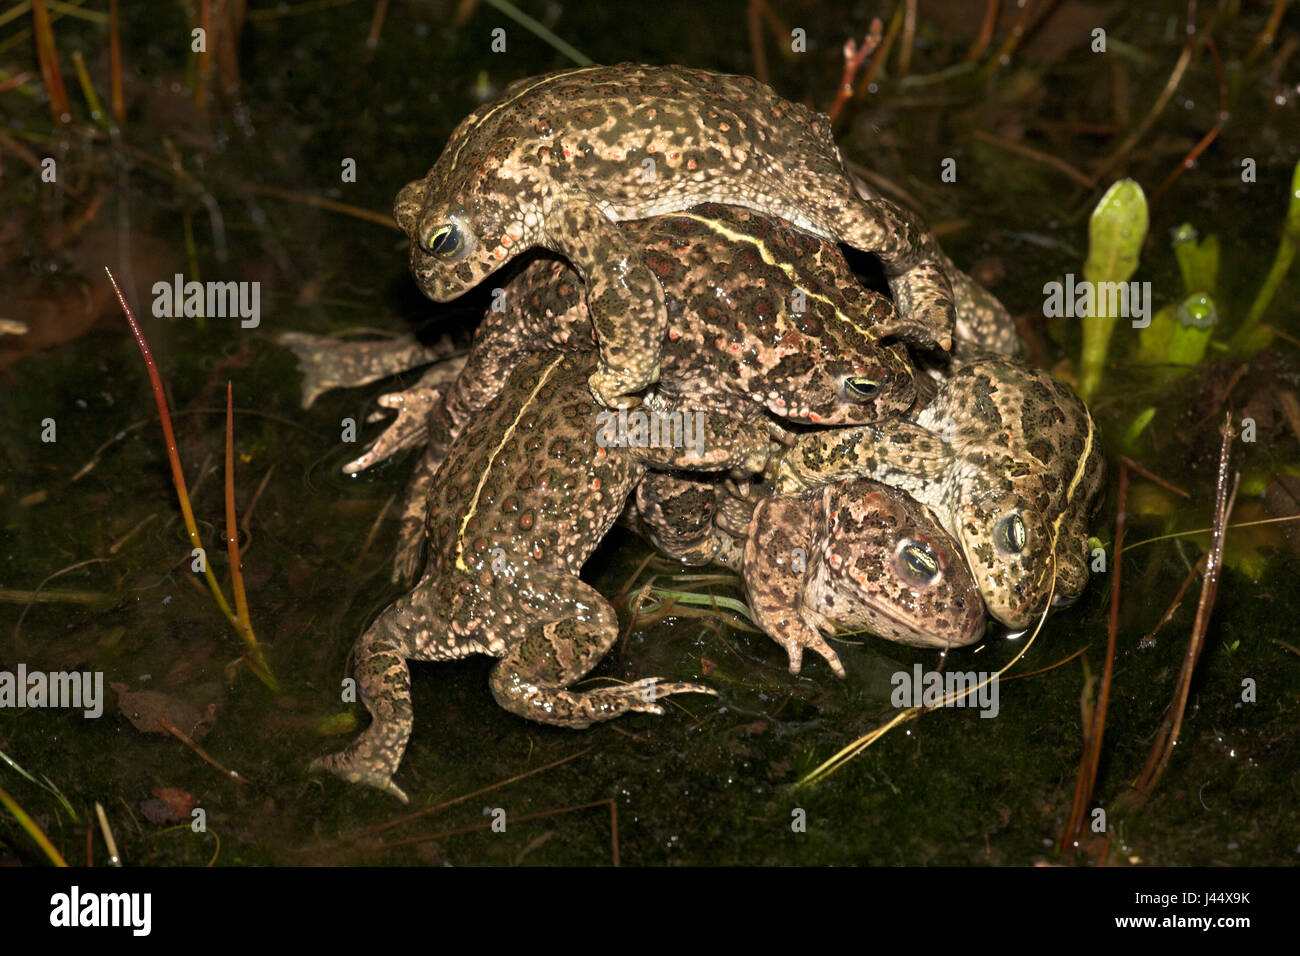 four male natterjack toads are fighting to mate with a female natterjack toad (under the males) Stock Photo